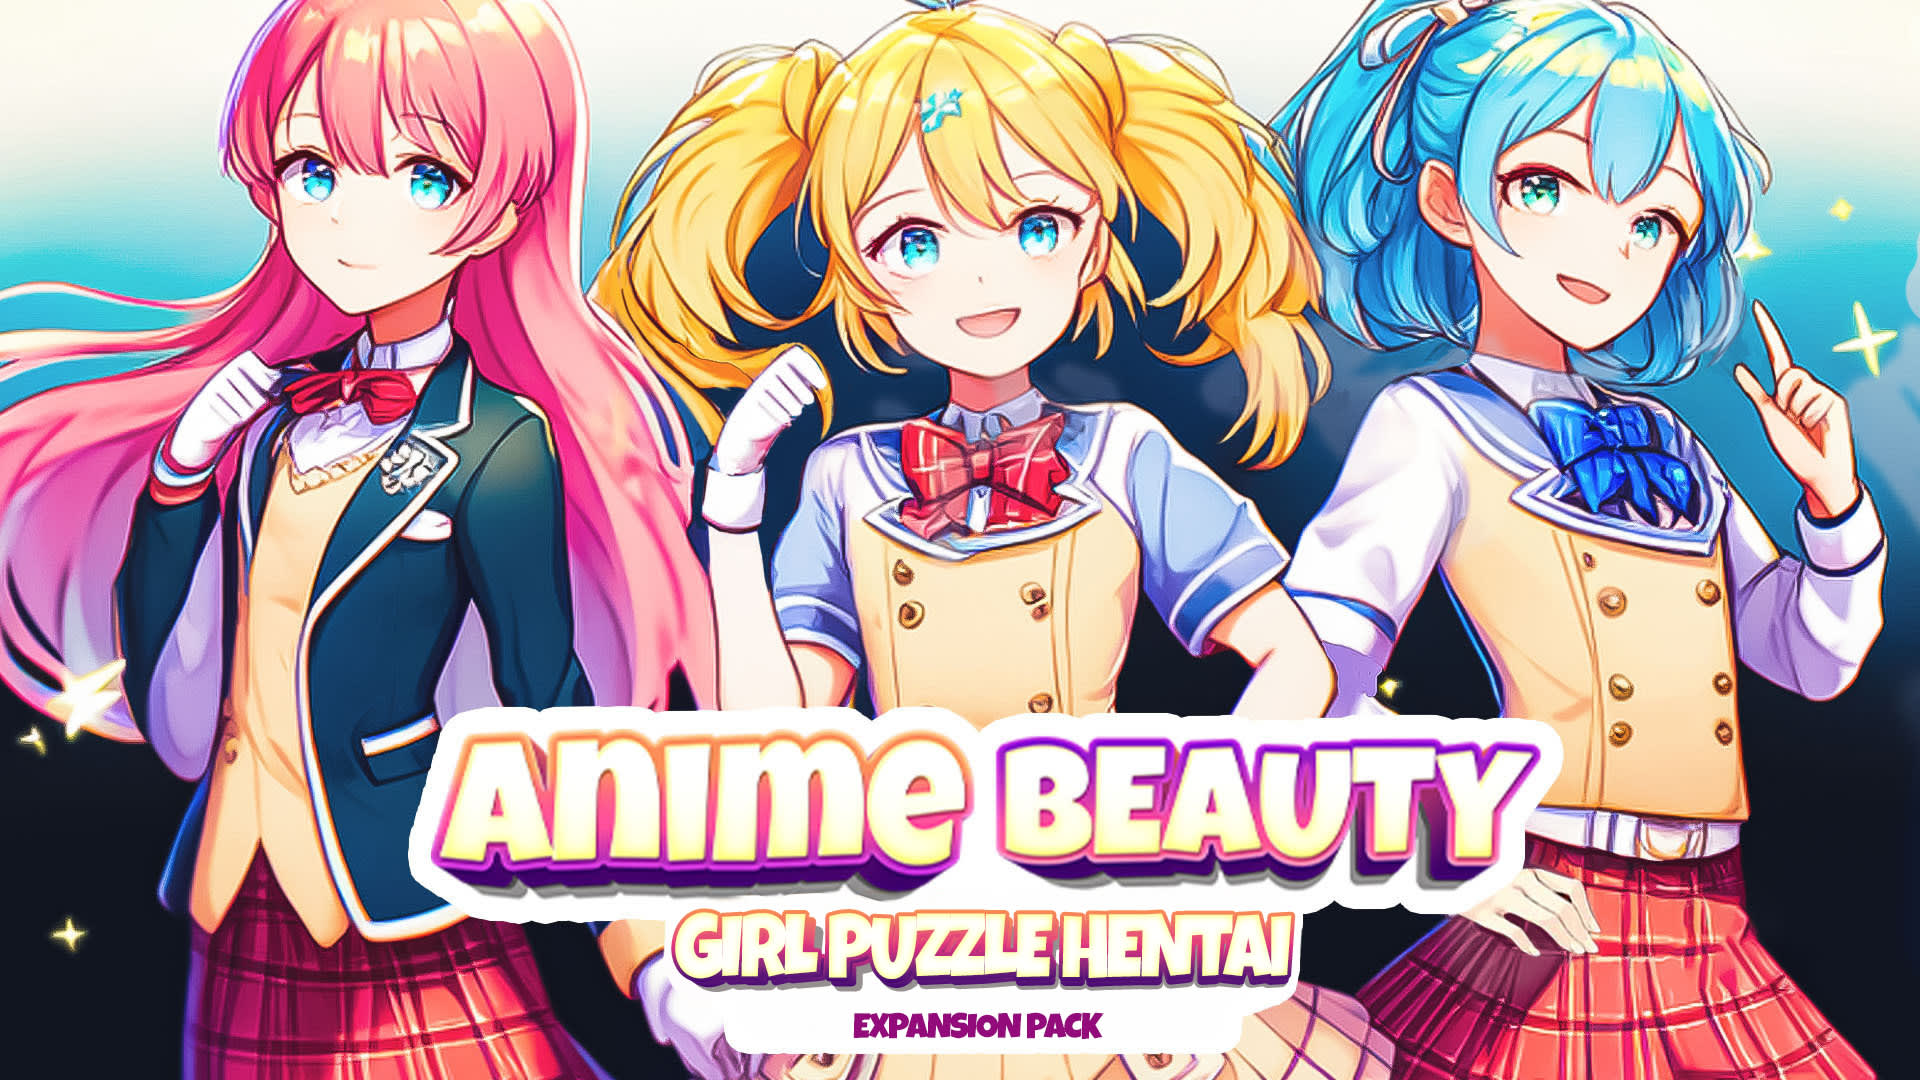 Anime Beauty Girl Puzzle Hentai - Expansion Pack 1